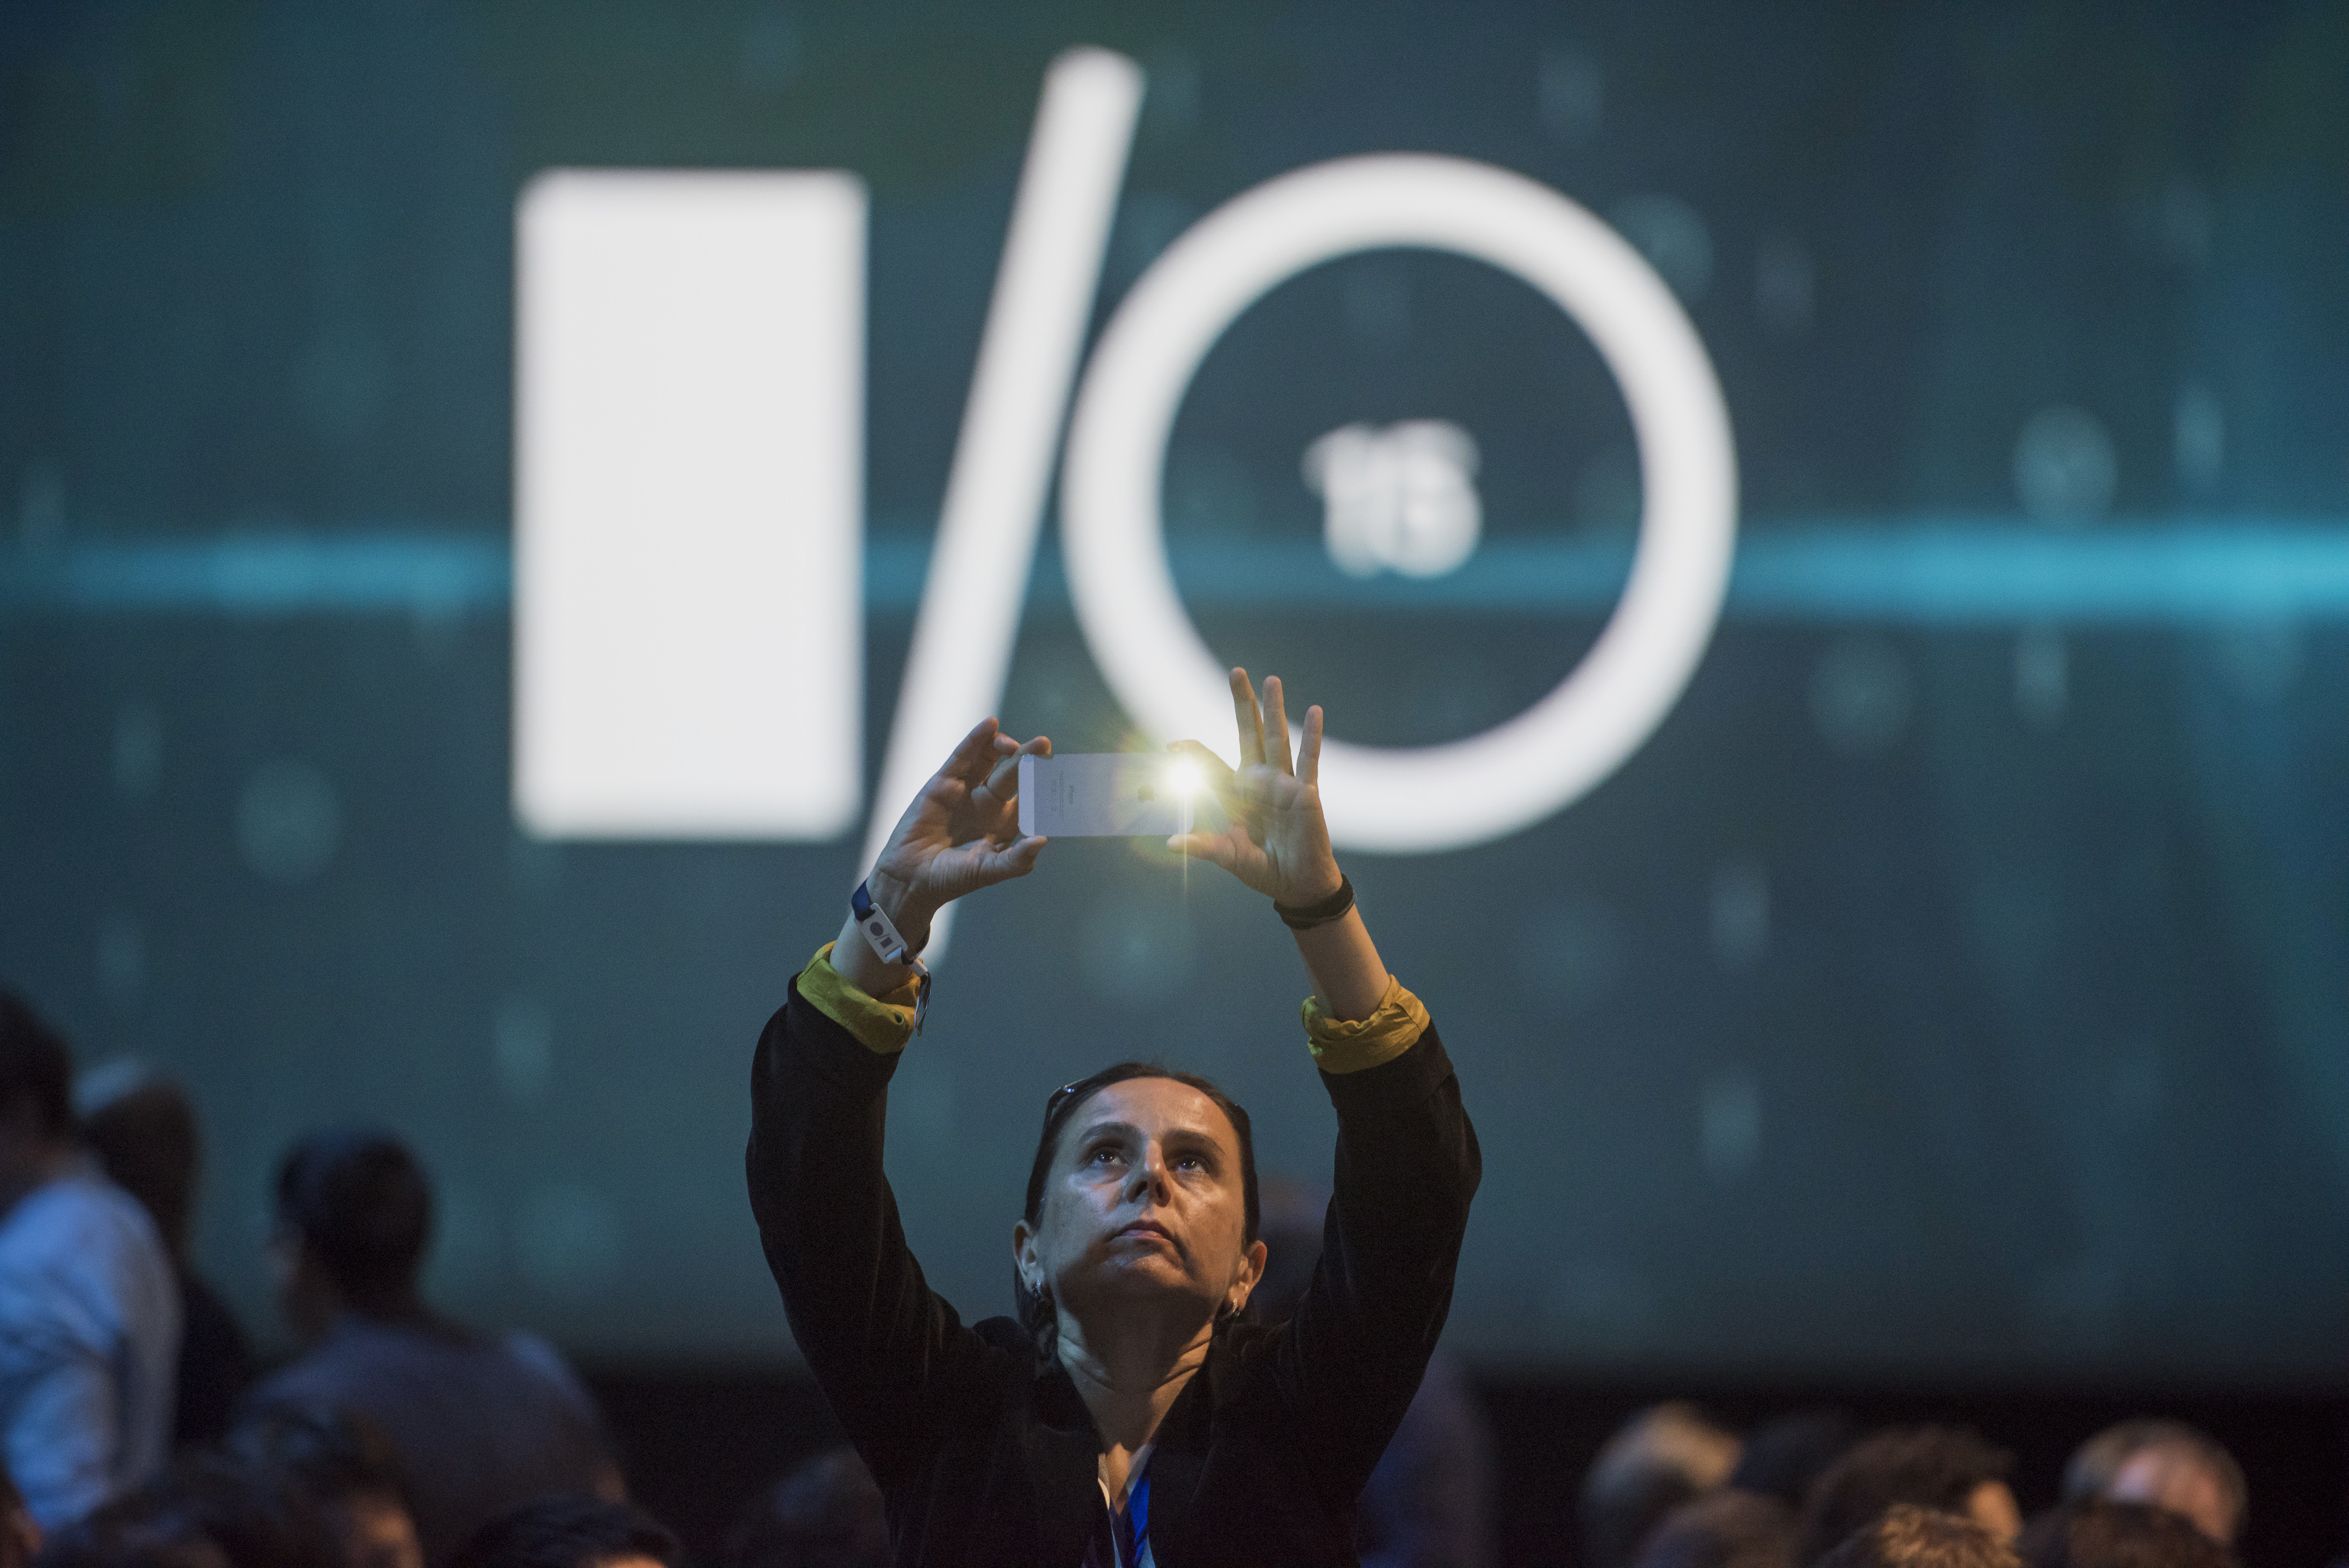 An attendee takes a photograph prior to the Google I/O Annual Developers Conference in San Francisco, California, U.S., on Thursday, May 28, 2014. (David Paul Morris—© 2015 Bloomberg Finance LP)